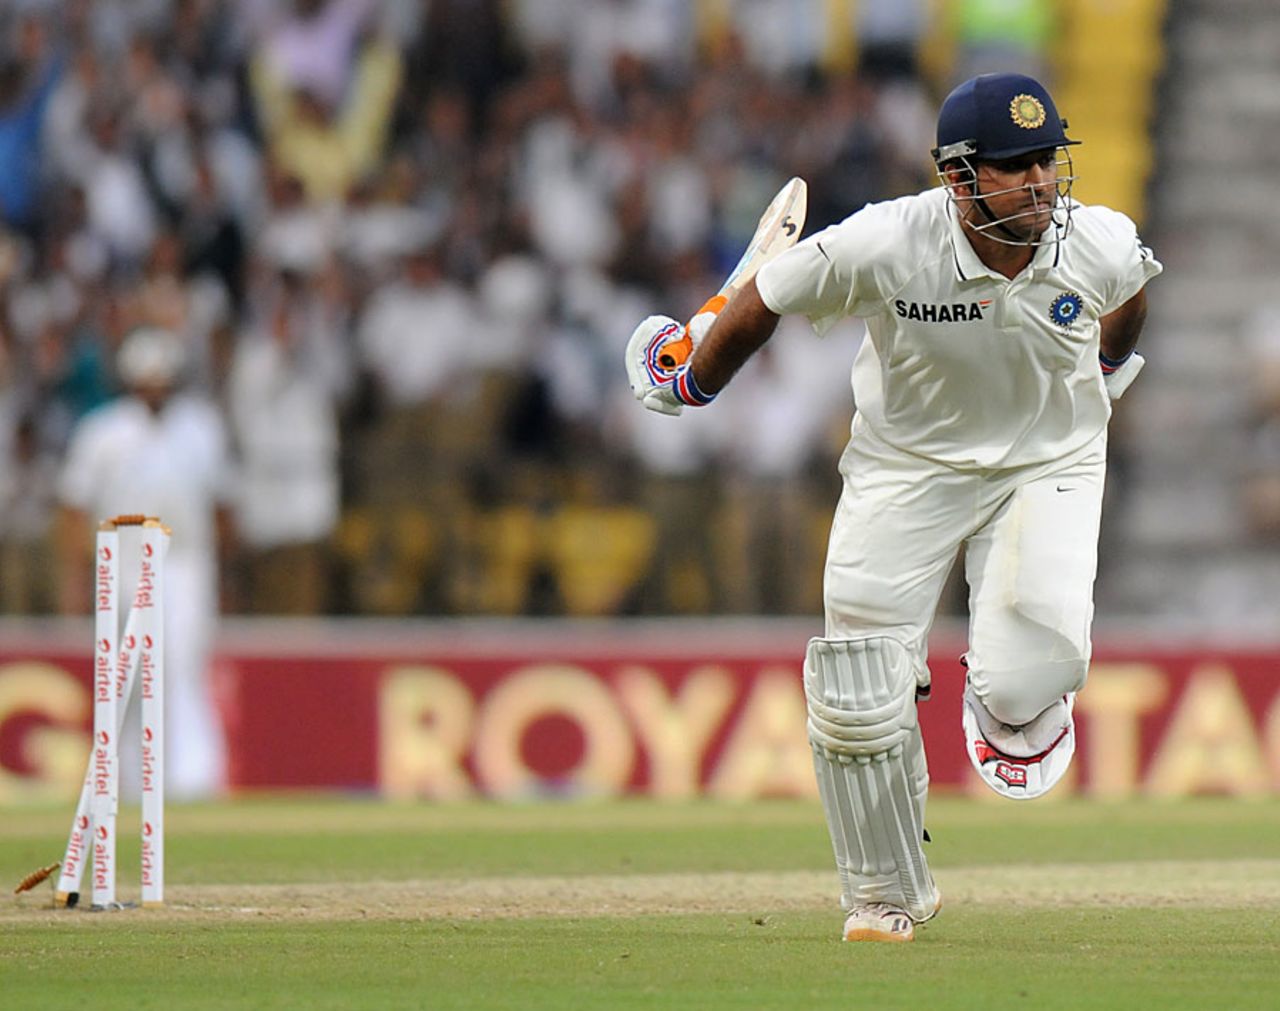 MS Dhoni was run out for 99, India v England, 4th Test, Nagpur, 3rd day, December 15, 2012